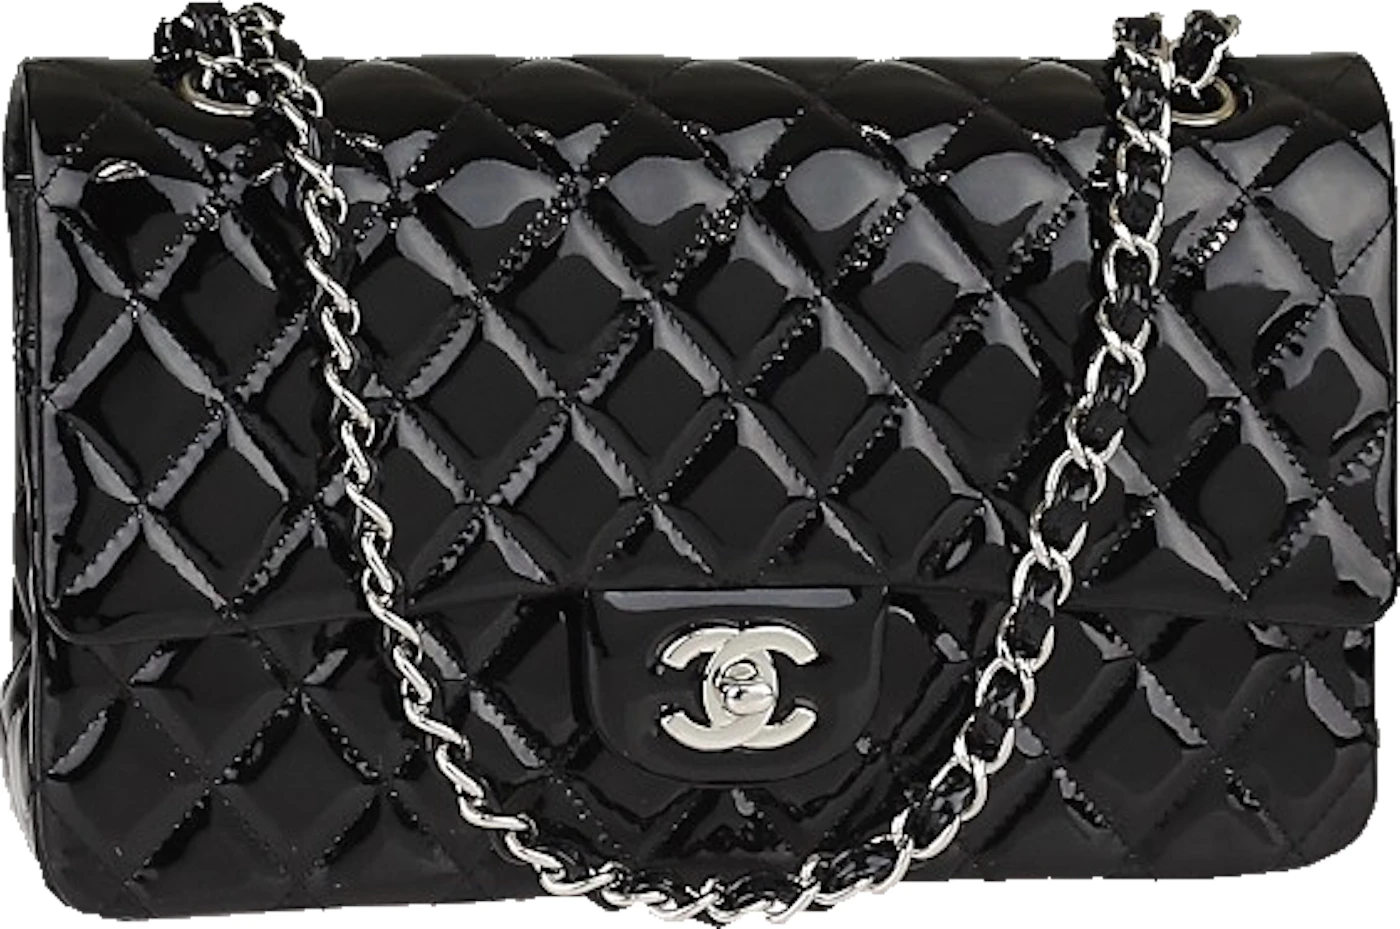 CHANEL Patent Quilted Maxi Double Flap Red 1261489